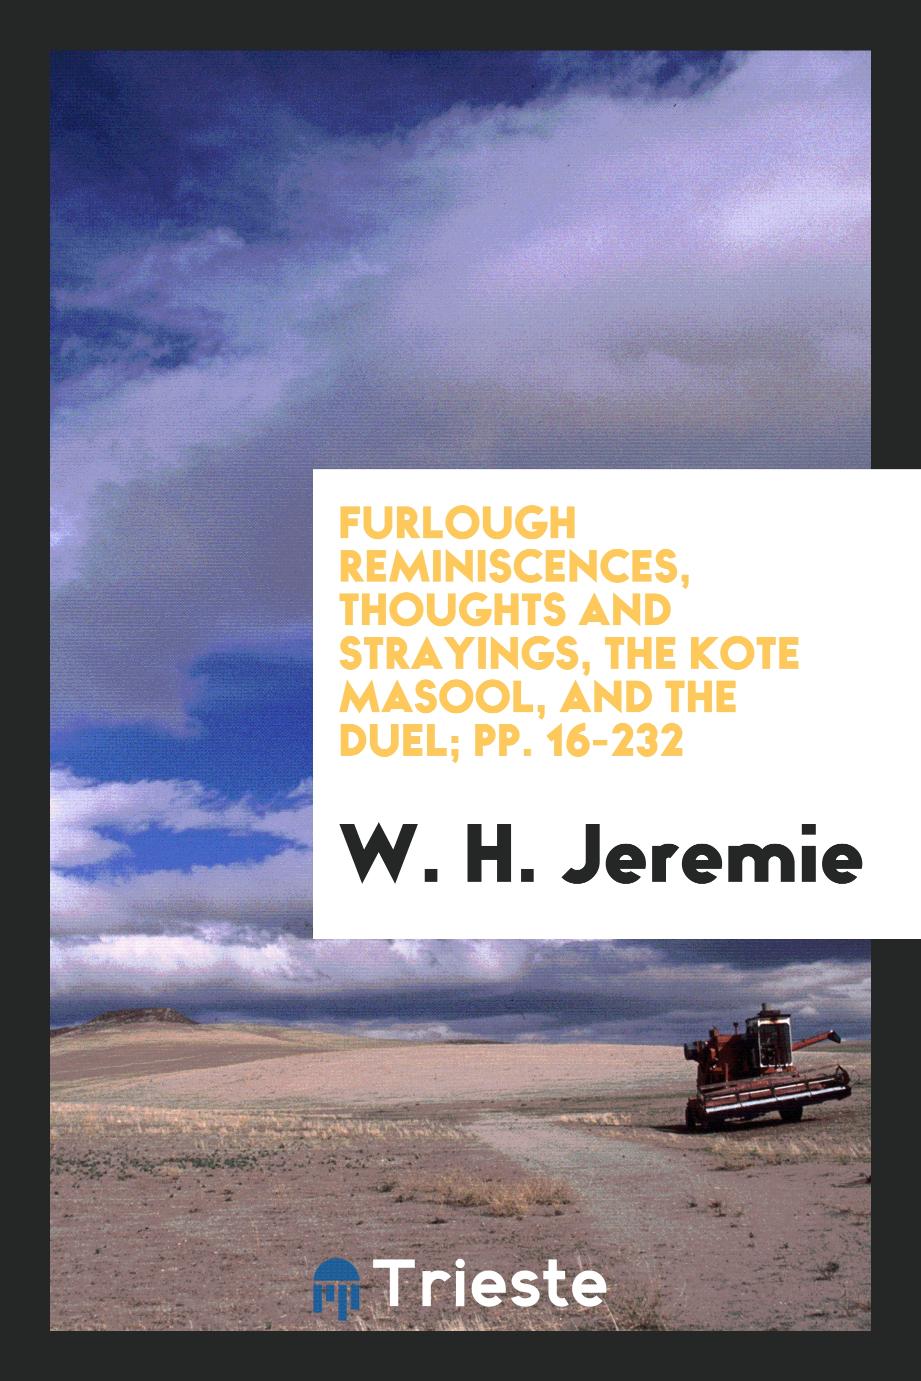 Furlough Reminiscences, Thoughts and Strayings, The Kote Masool, and The Duel; pp. 16-232